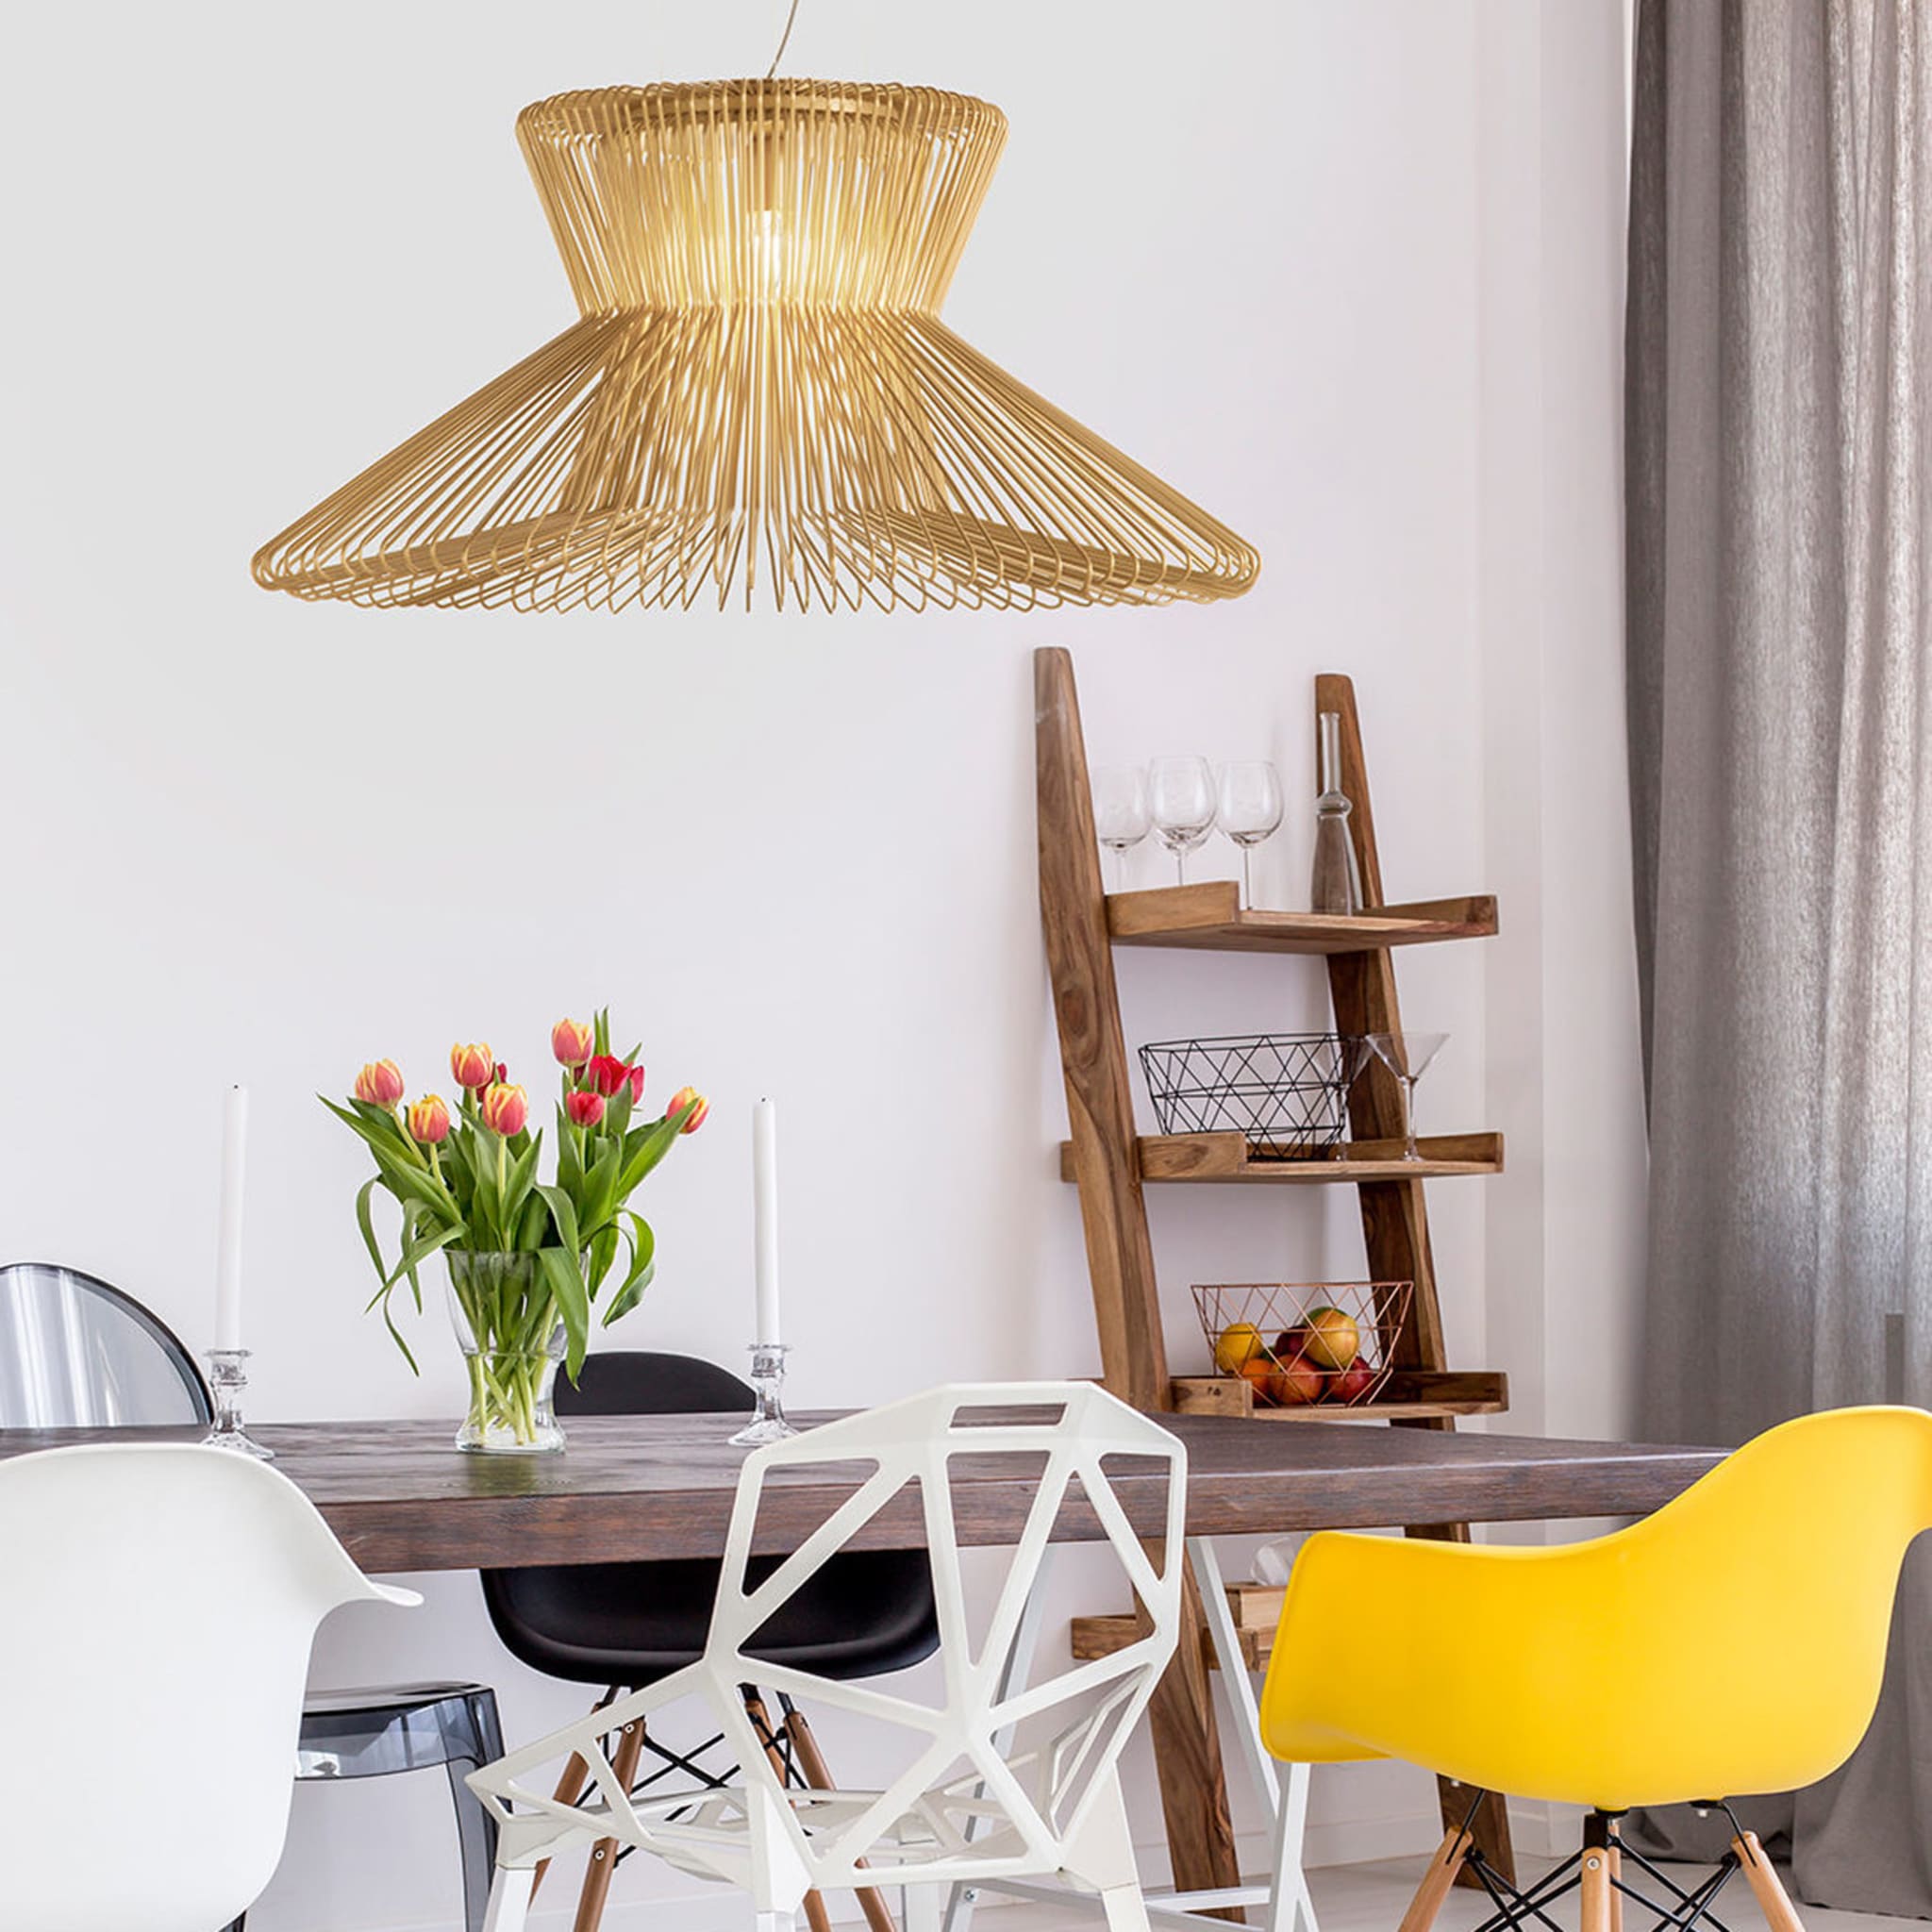 Impossible B Ø 105 Gold Pendant Lamp by Massimo Mussapi - Alternative view 1